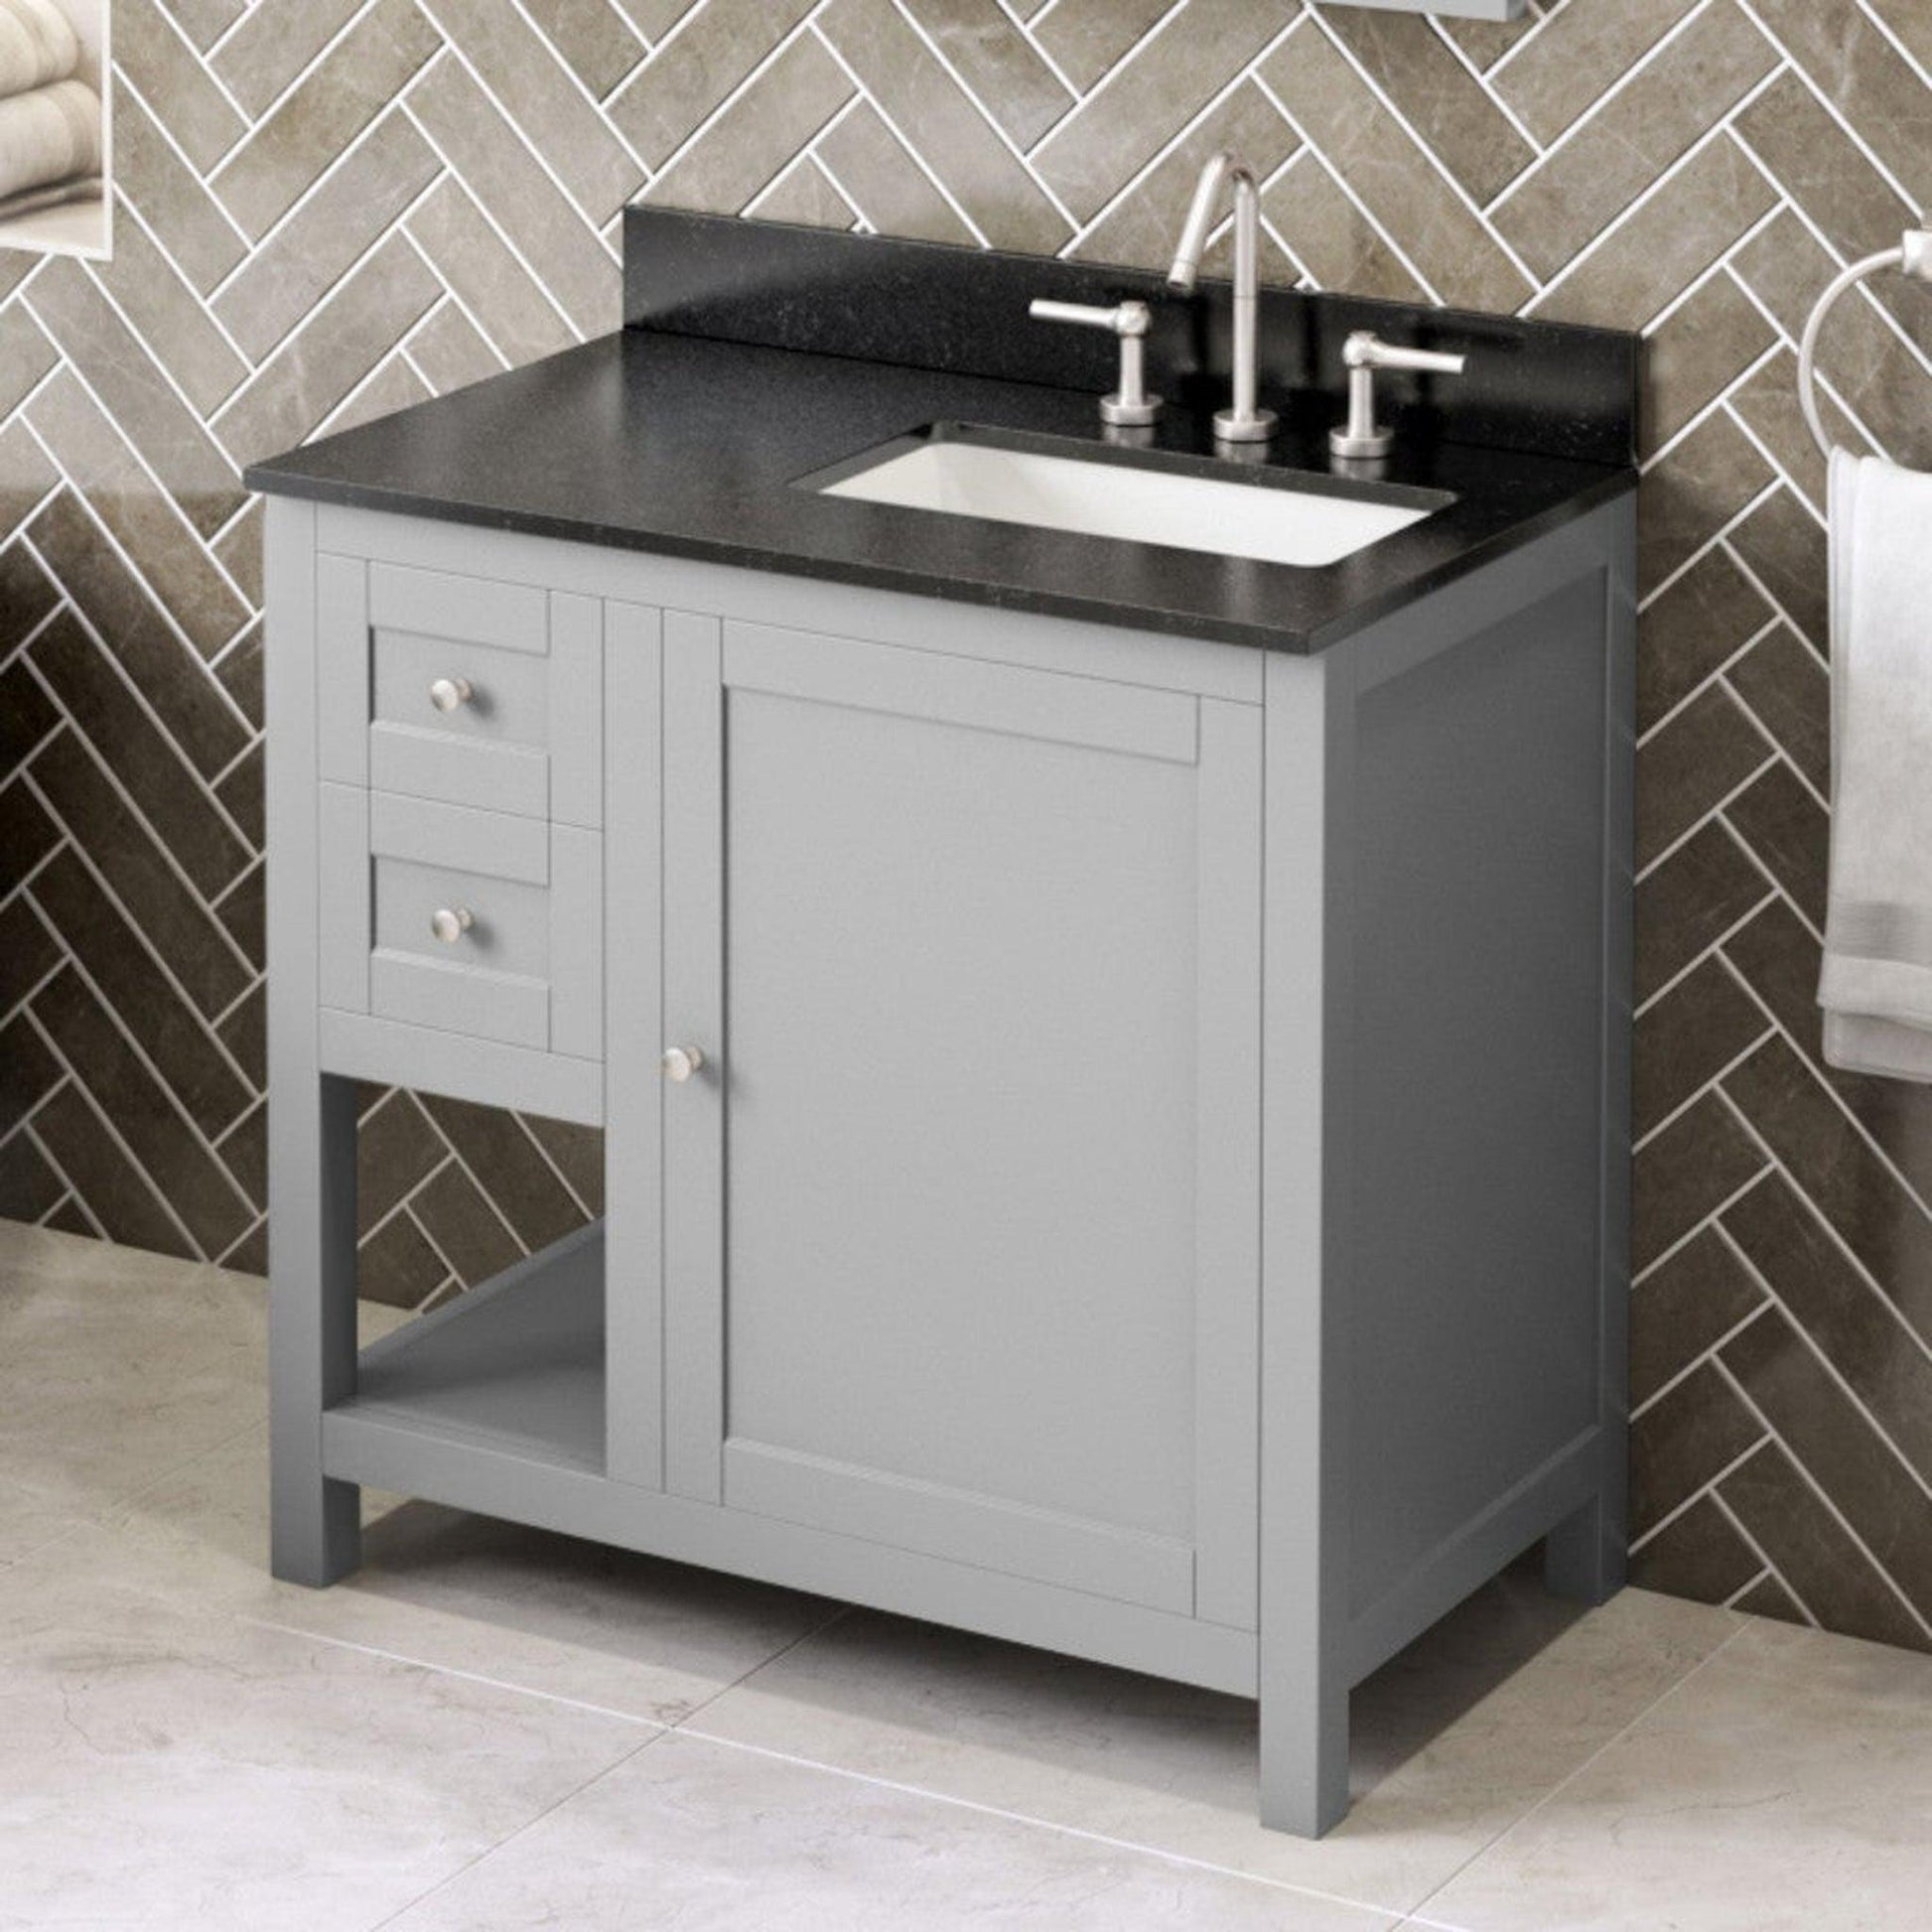 8 No Wiggle Soft-close Vanity Cabinet Pullout